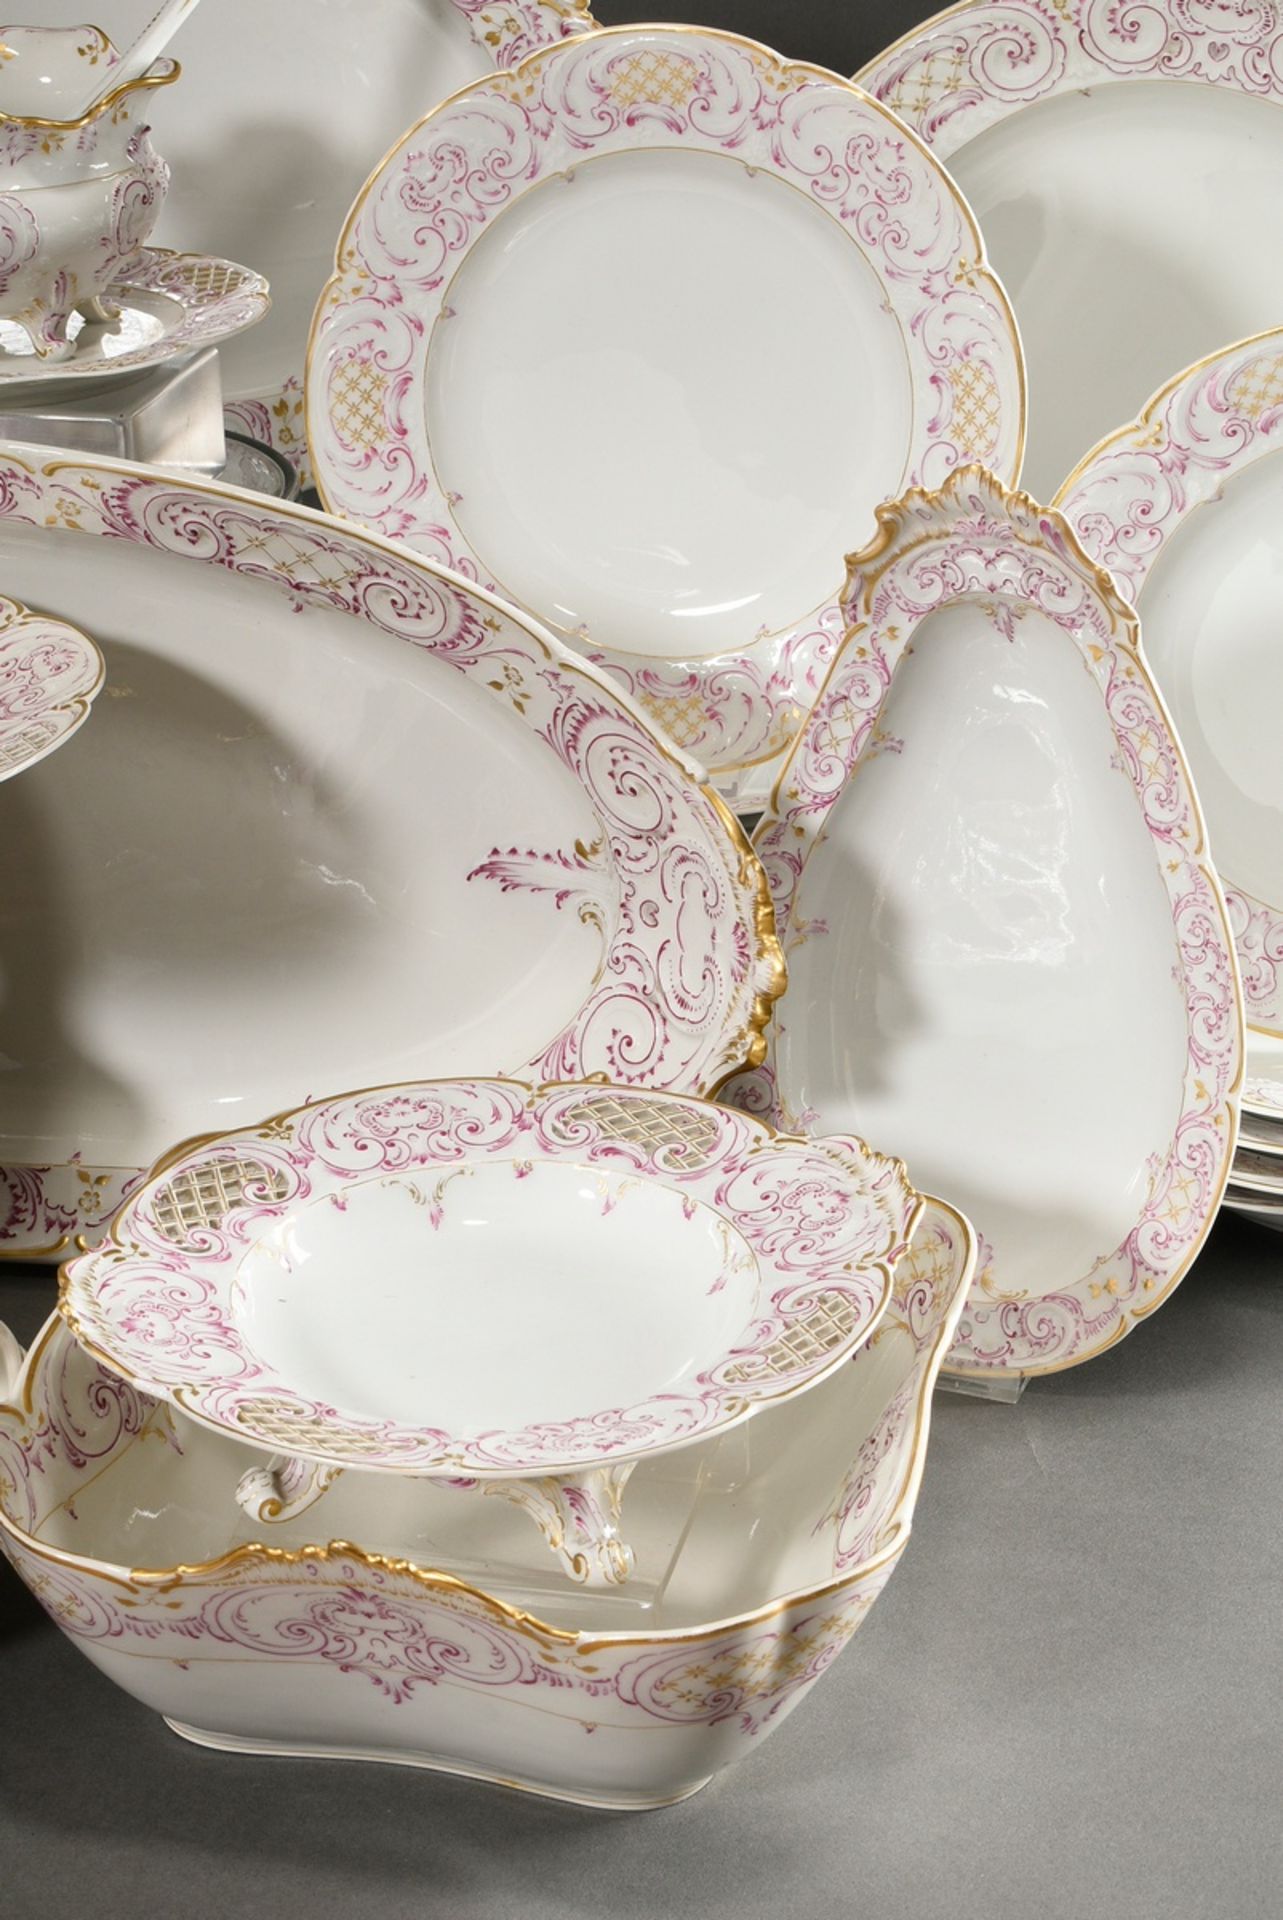 69 Pieces KPM dinner service in Rococo form with purple and gold staffage, red imperial orb mark, c - Image 5 of 22